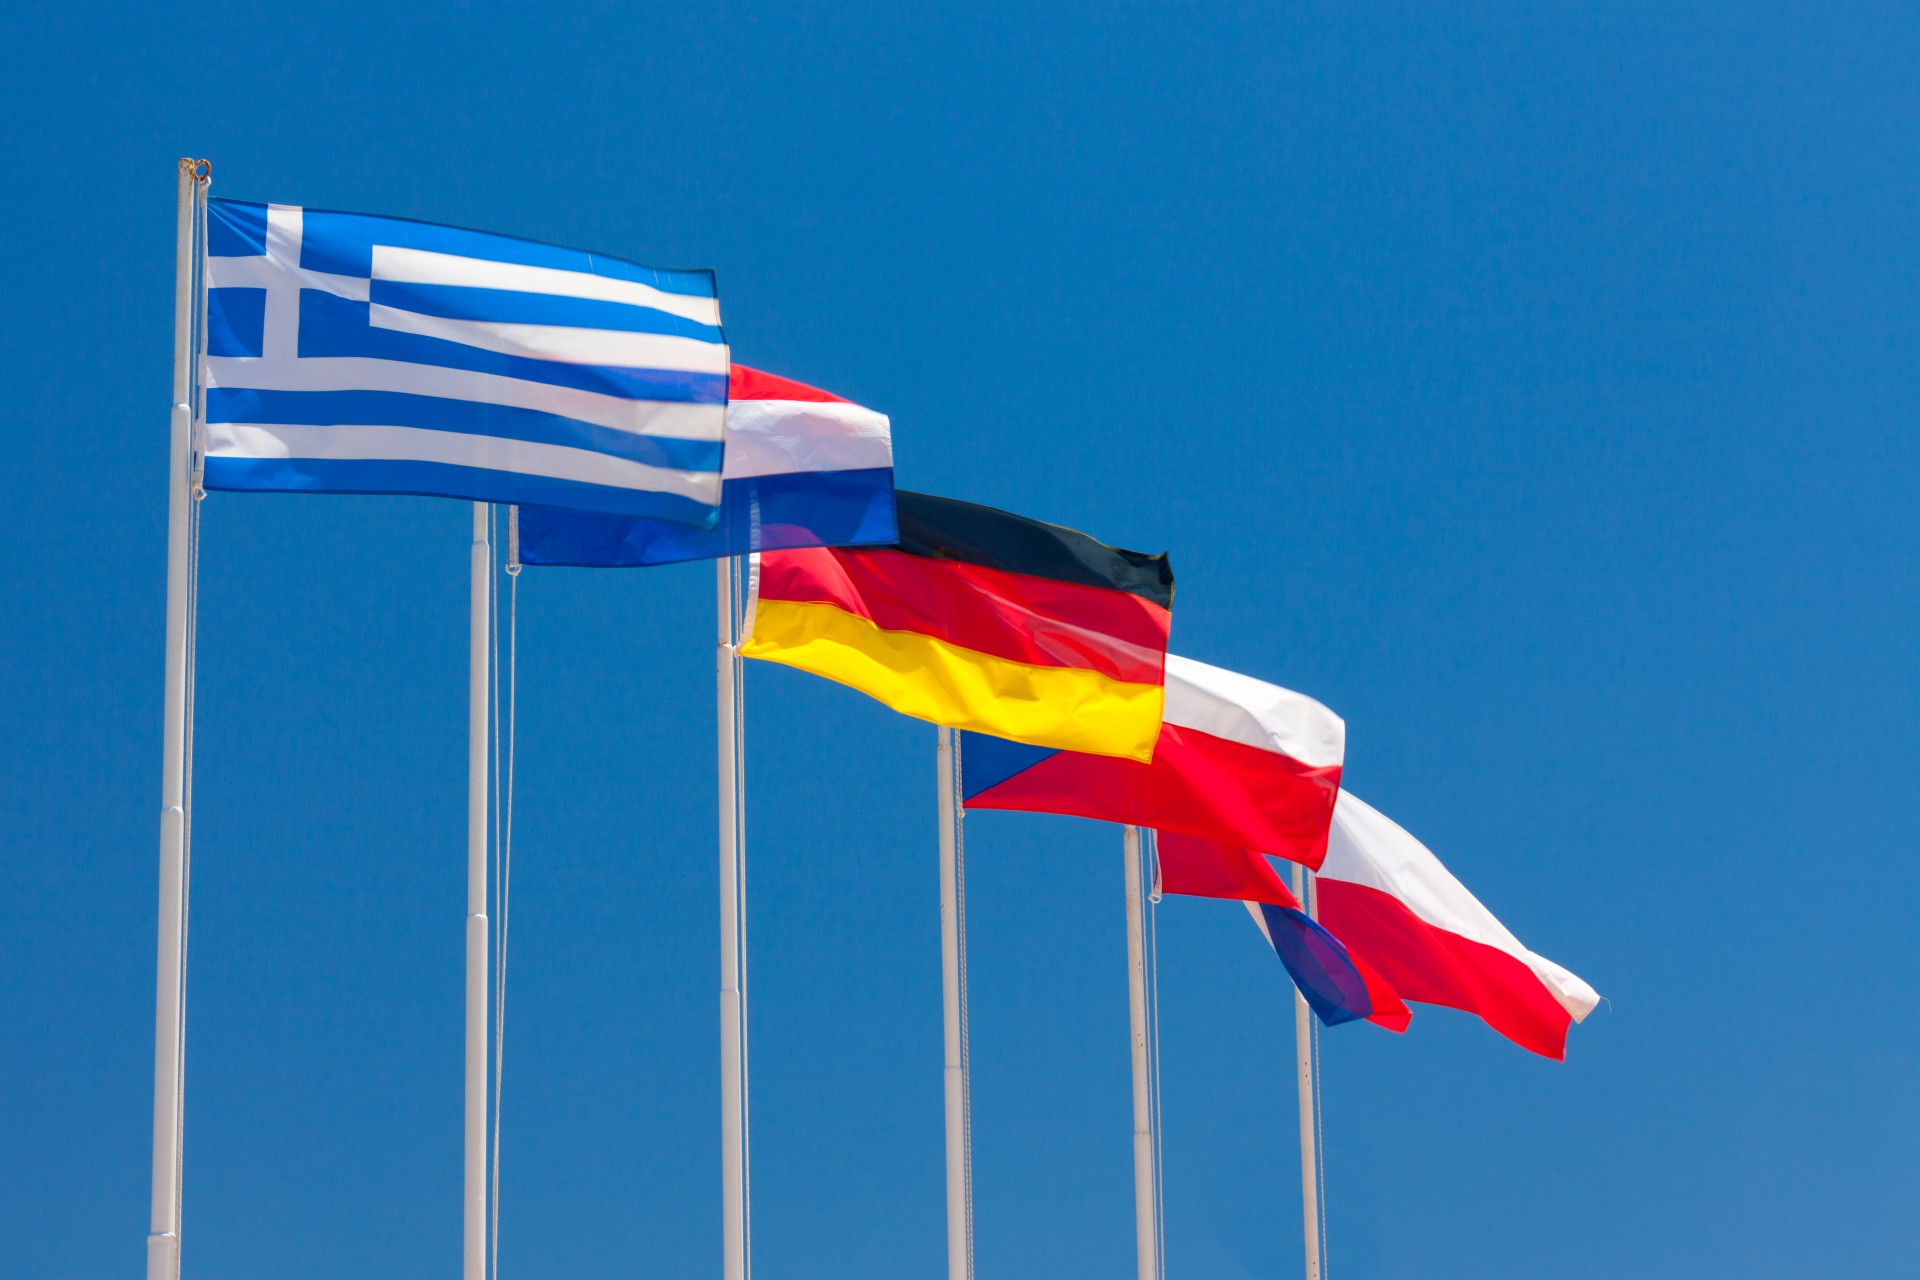 Several national flags against blue sky